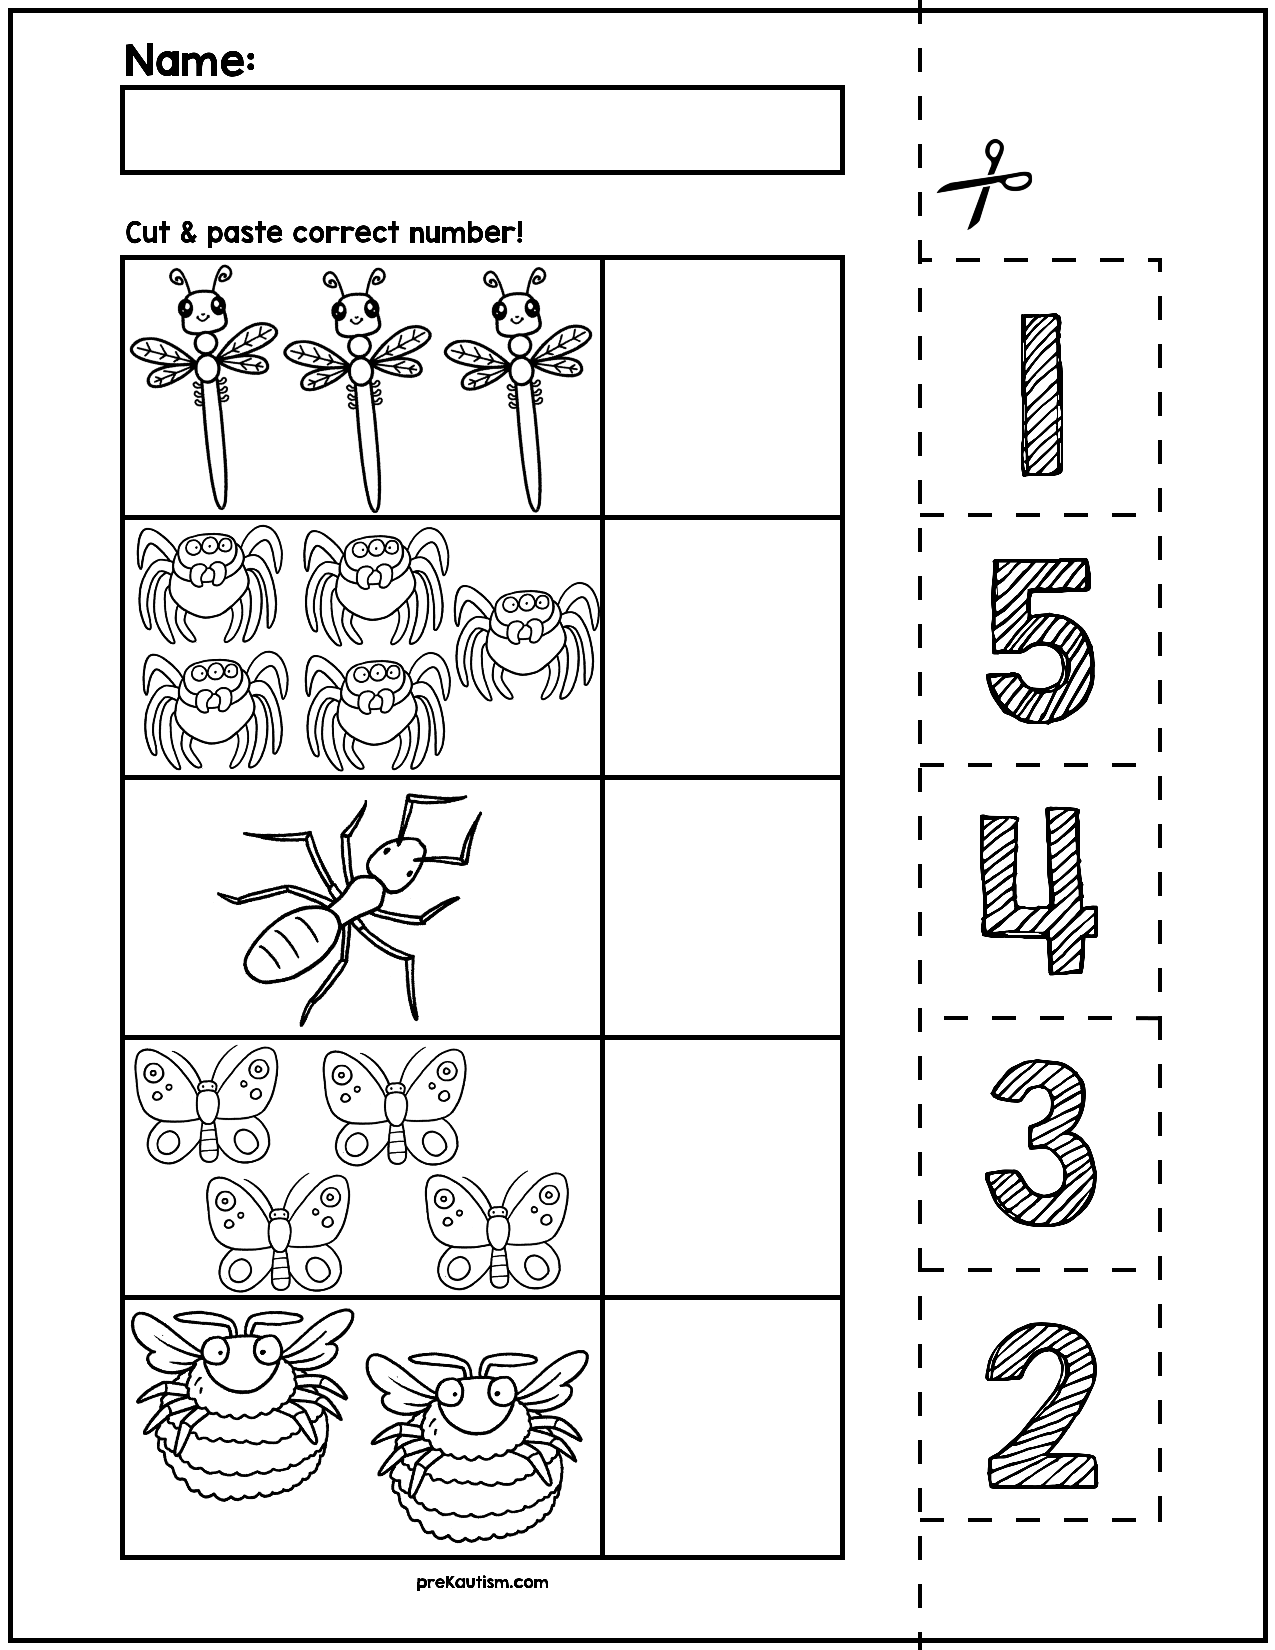 insect-counting-numbers-1-5-worksheets-worksheetscity